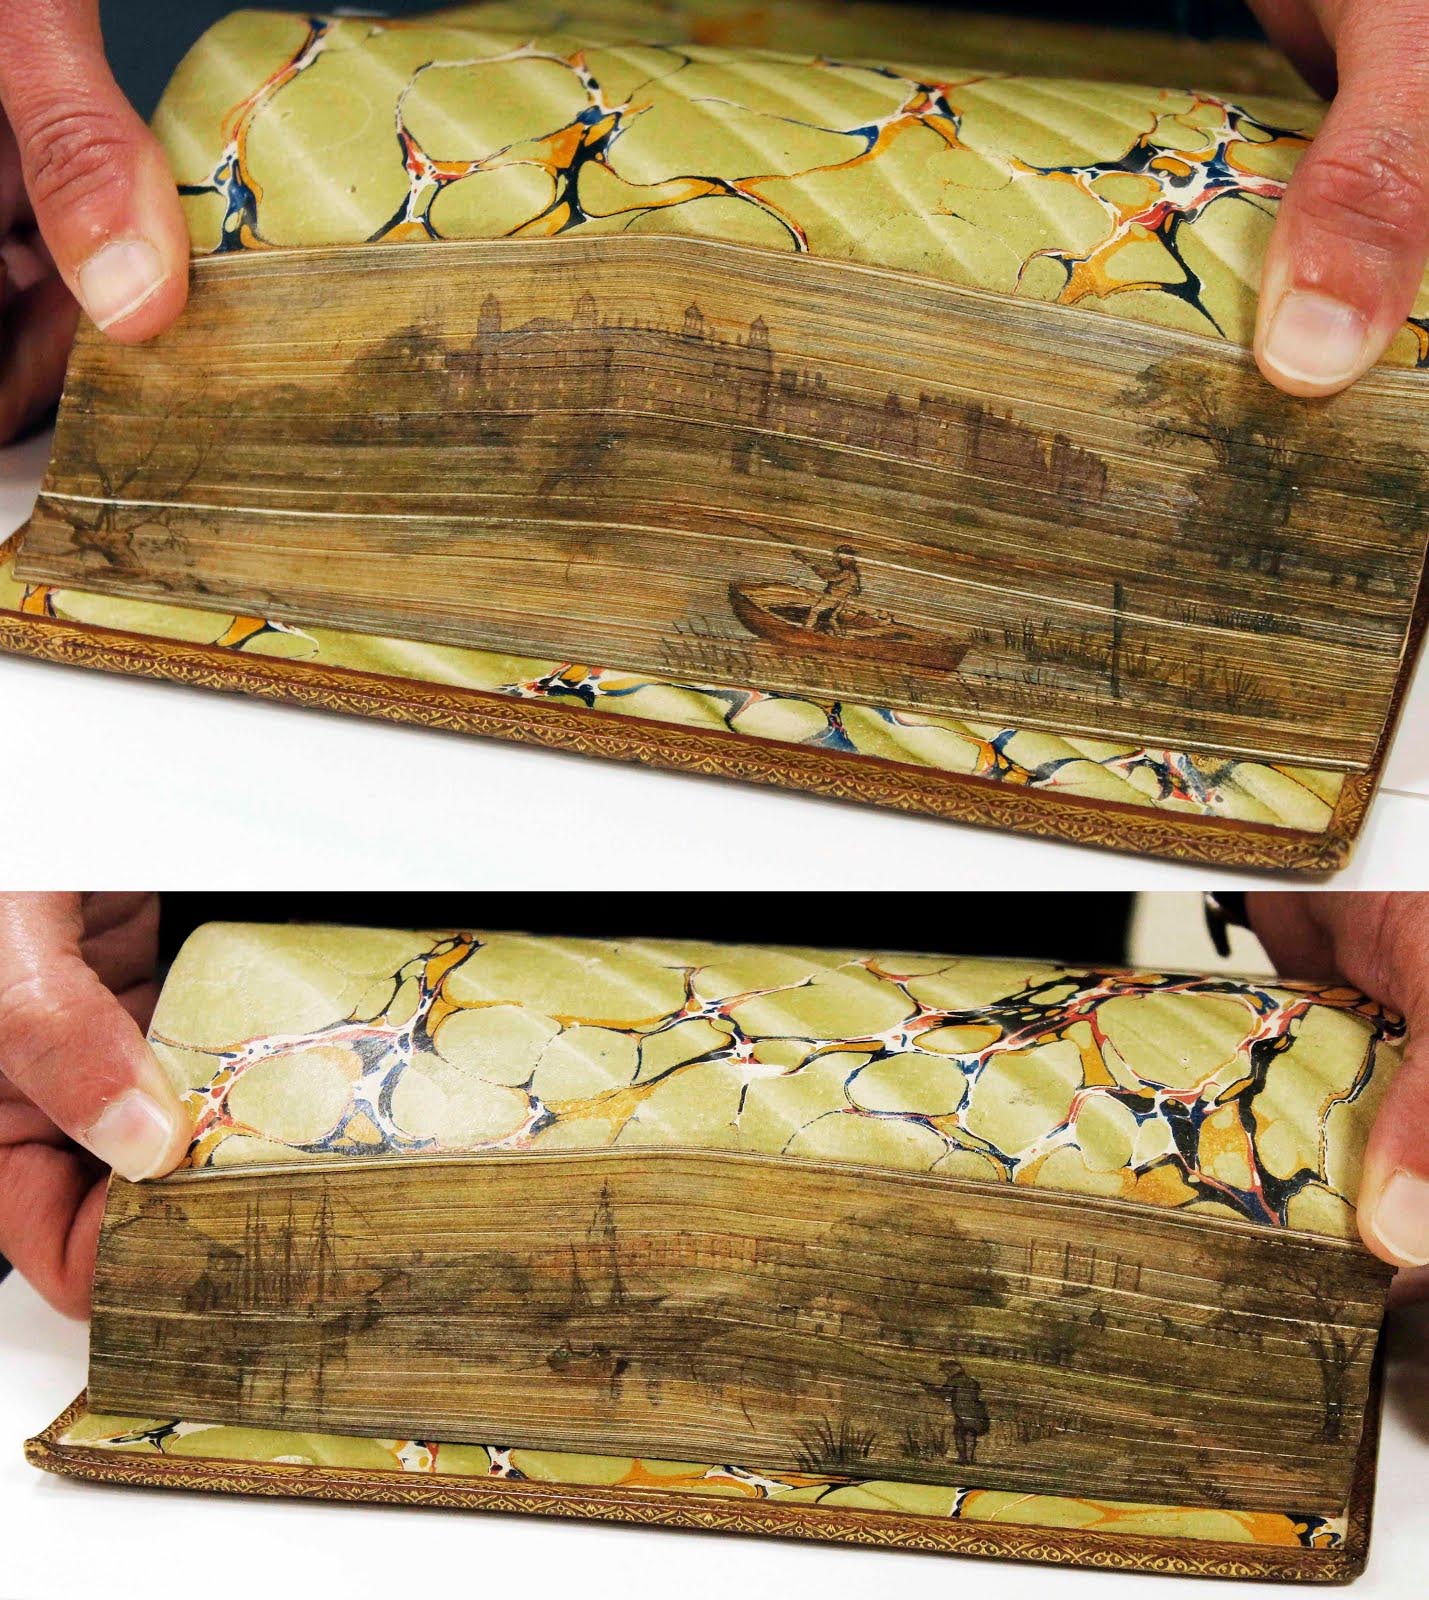 Two examples of fore-edge paintings: top painting is of a man rowing his boat towards a castle in the distance; bottom painting is of a man fishing across from a dock